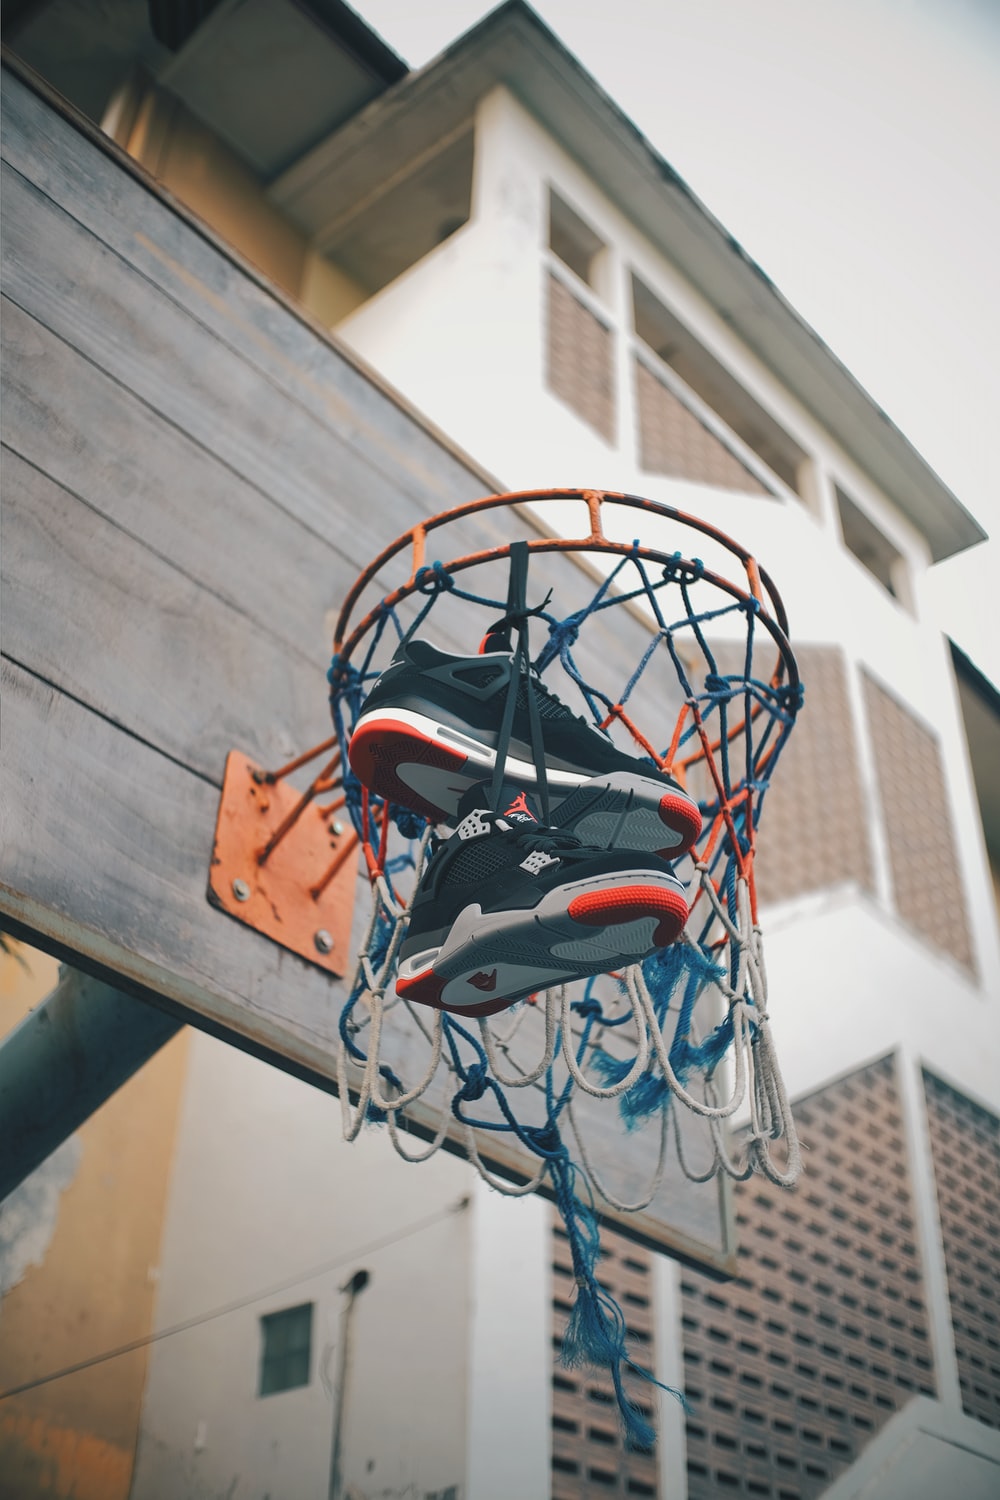 Basketball Shoes Wallpapers